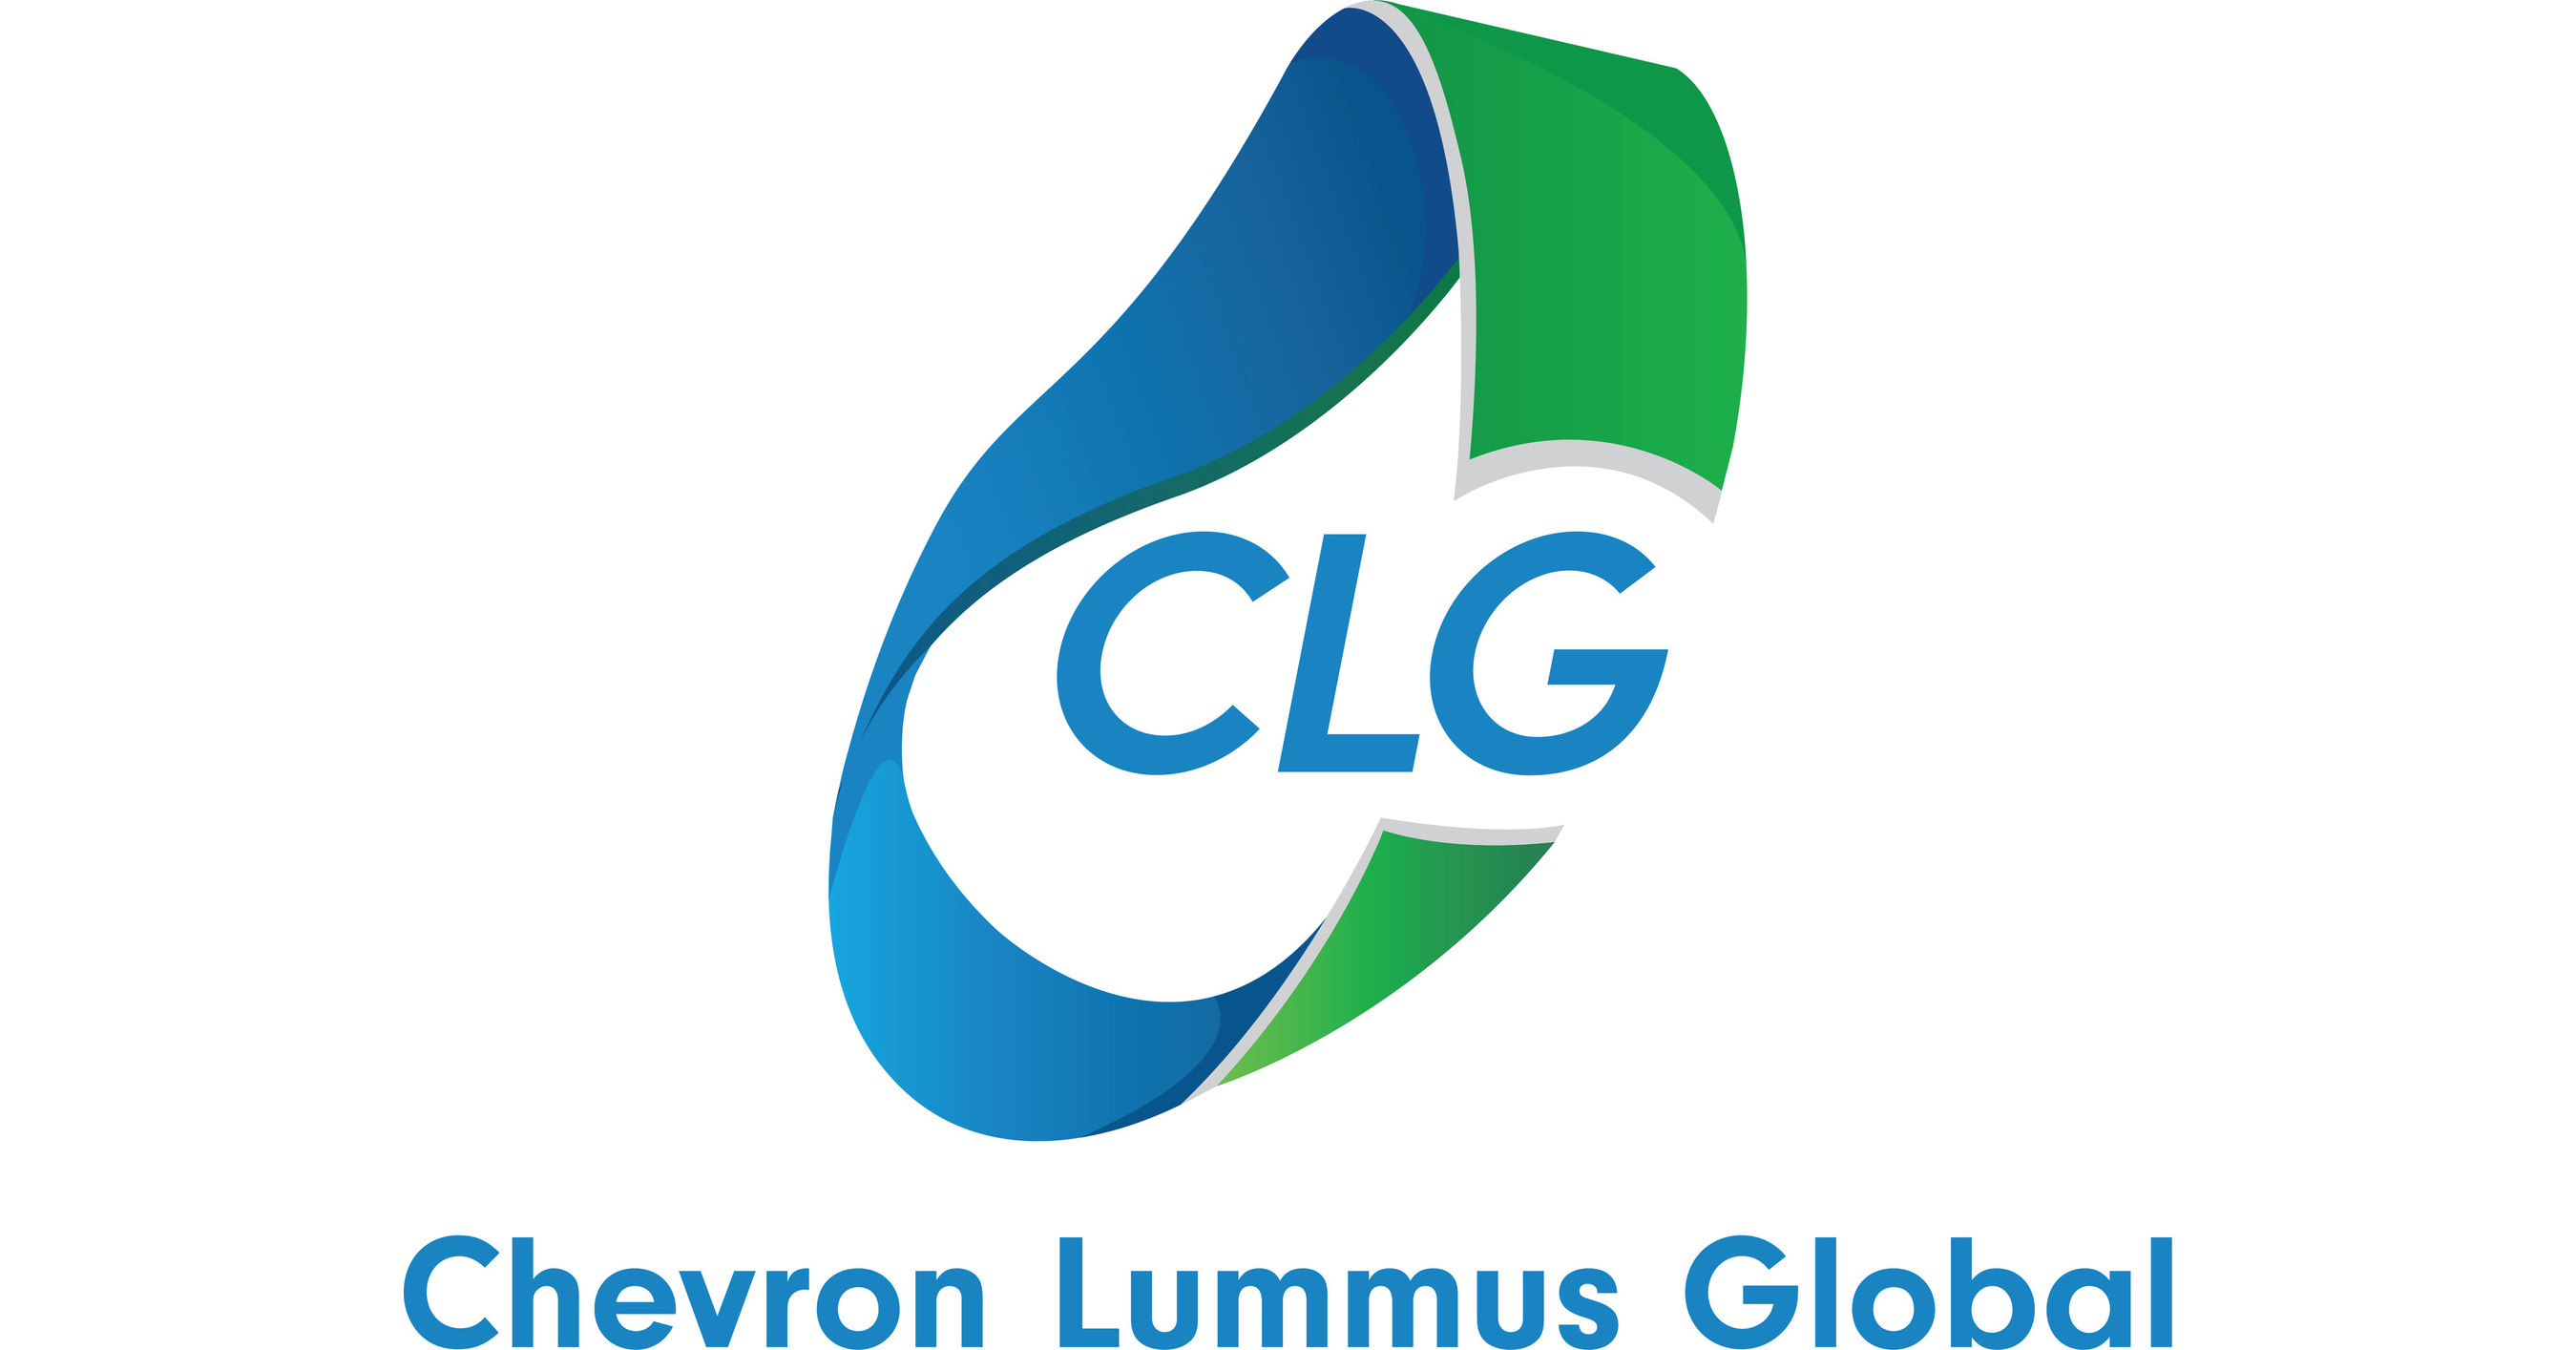 Chevron Lummus Global’s ISOTERRA Technology Chosen for Sustainable Aviation Fuel Project in China